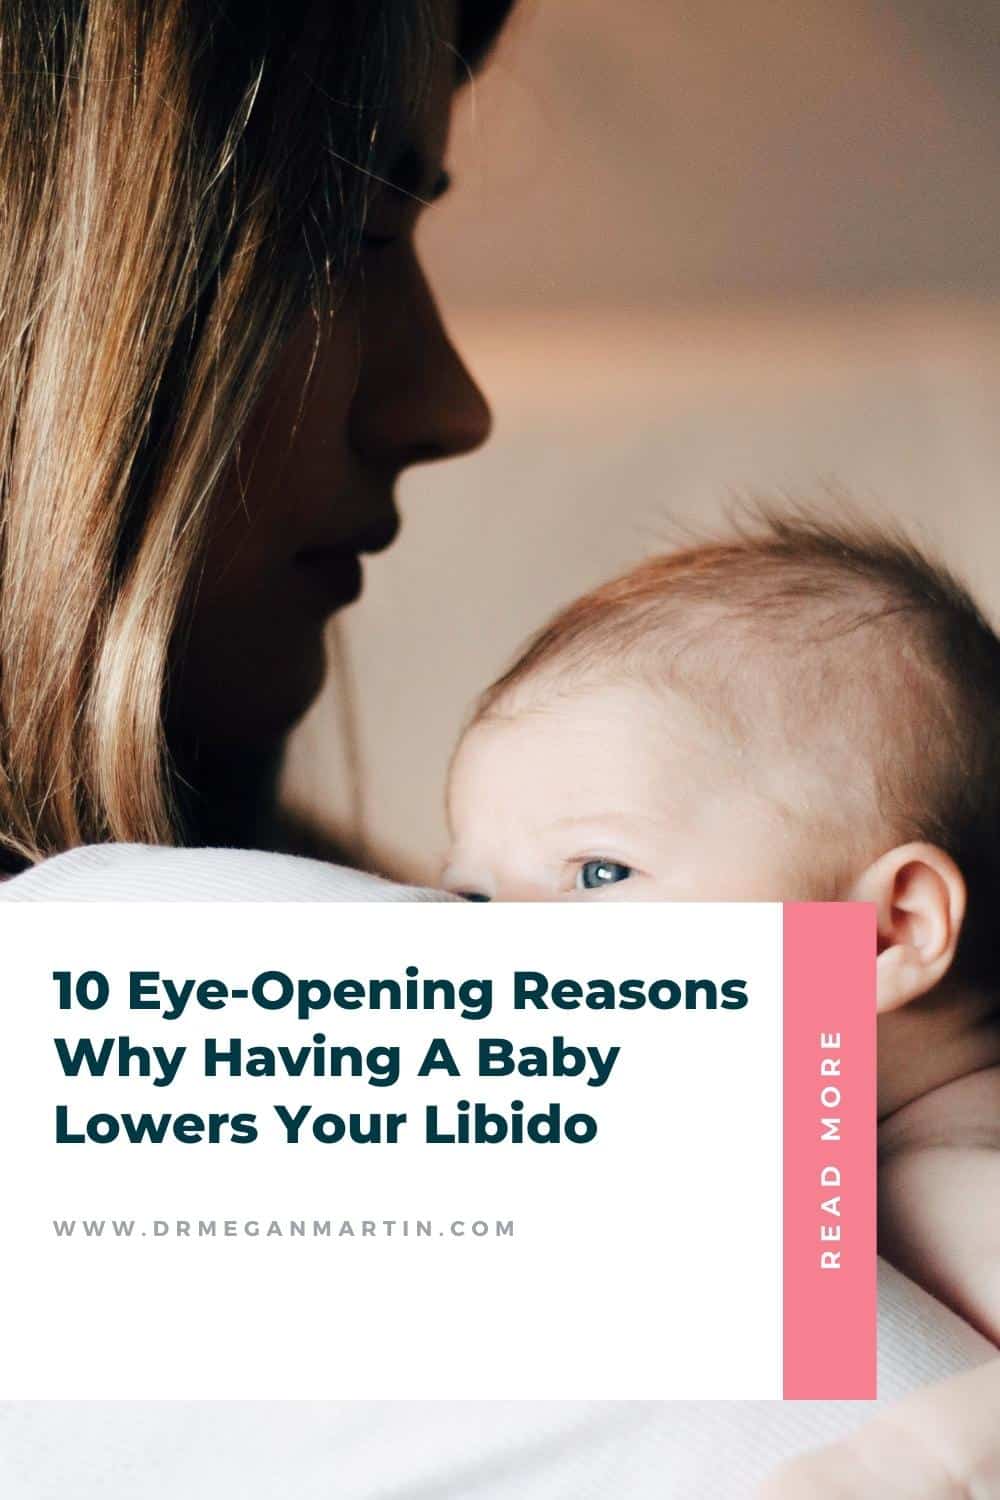 Reasons Why Having A Baby Lowers Your Libido